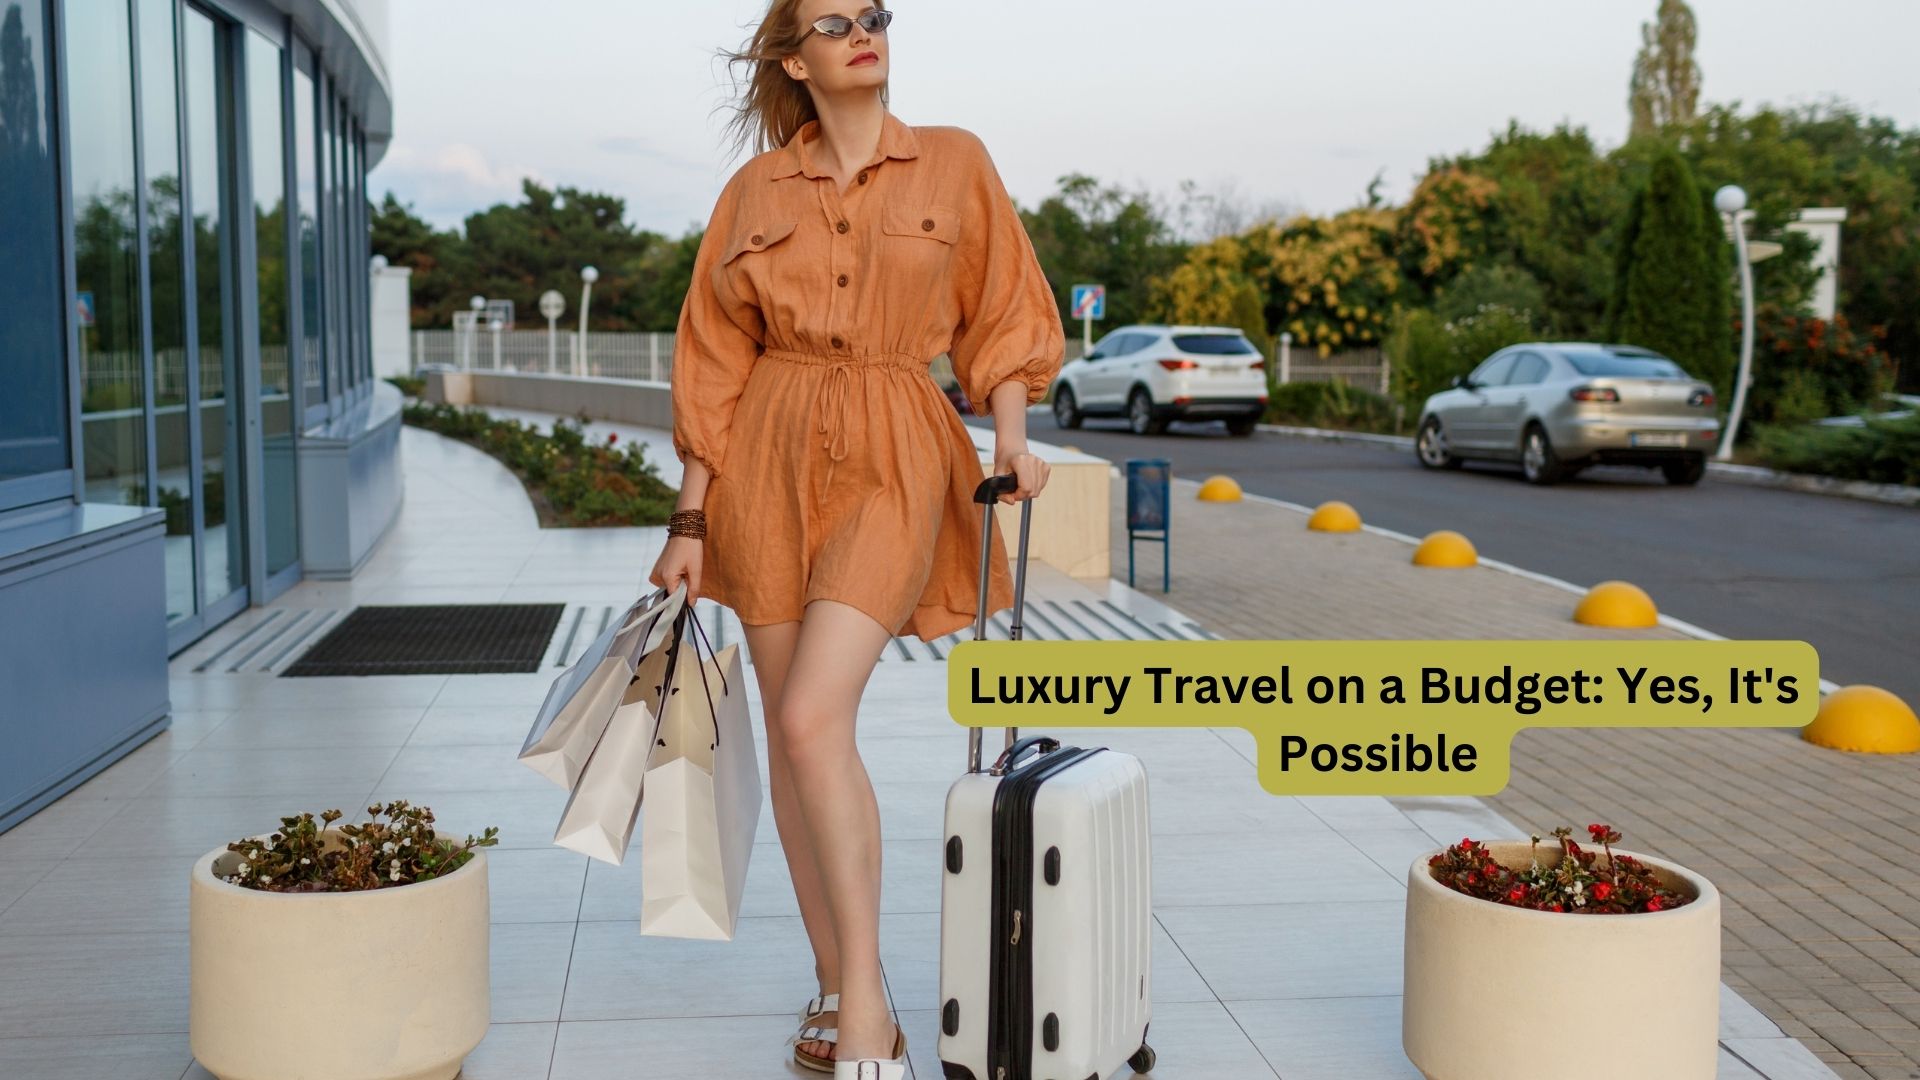 Luxury Travel on a Budget: Yes, It's Possible